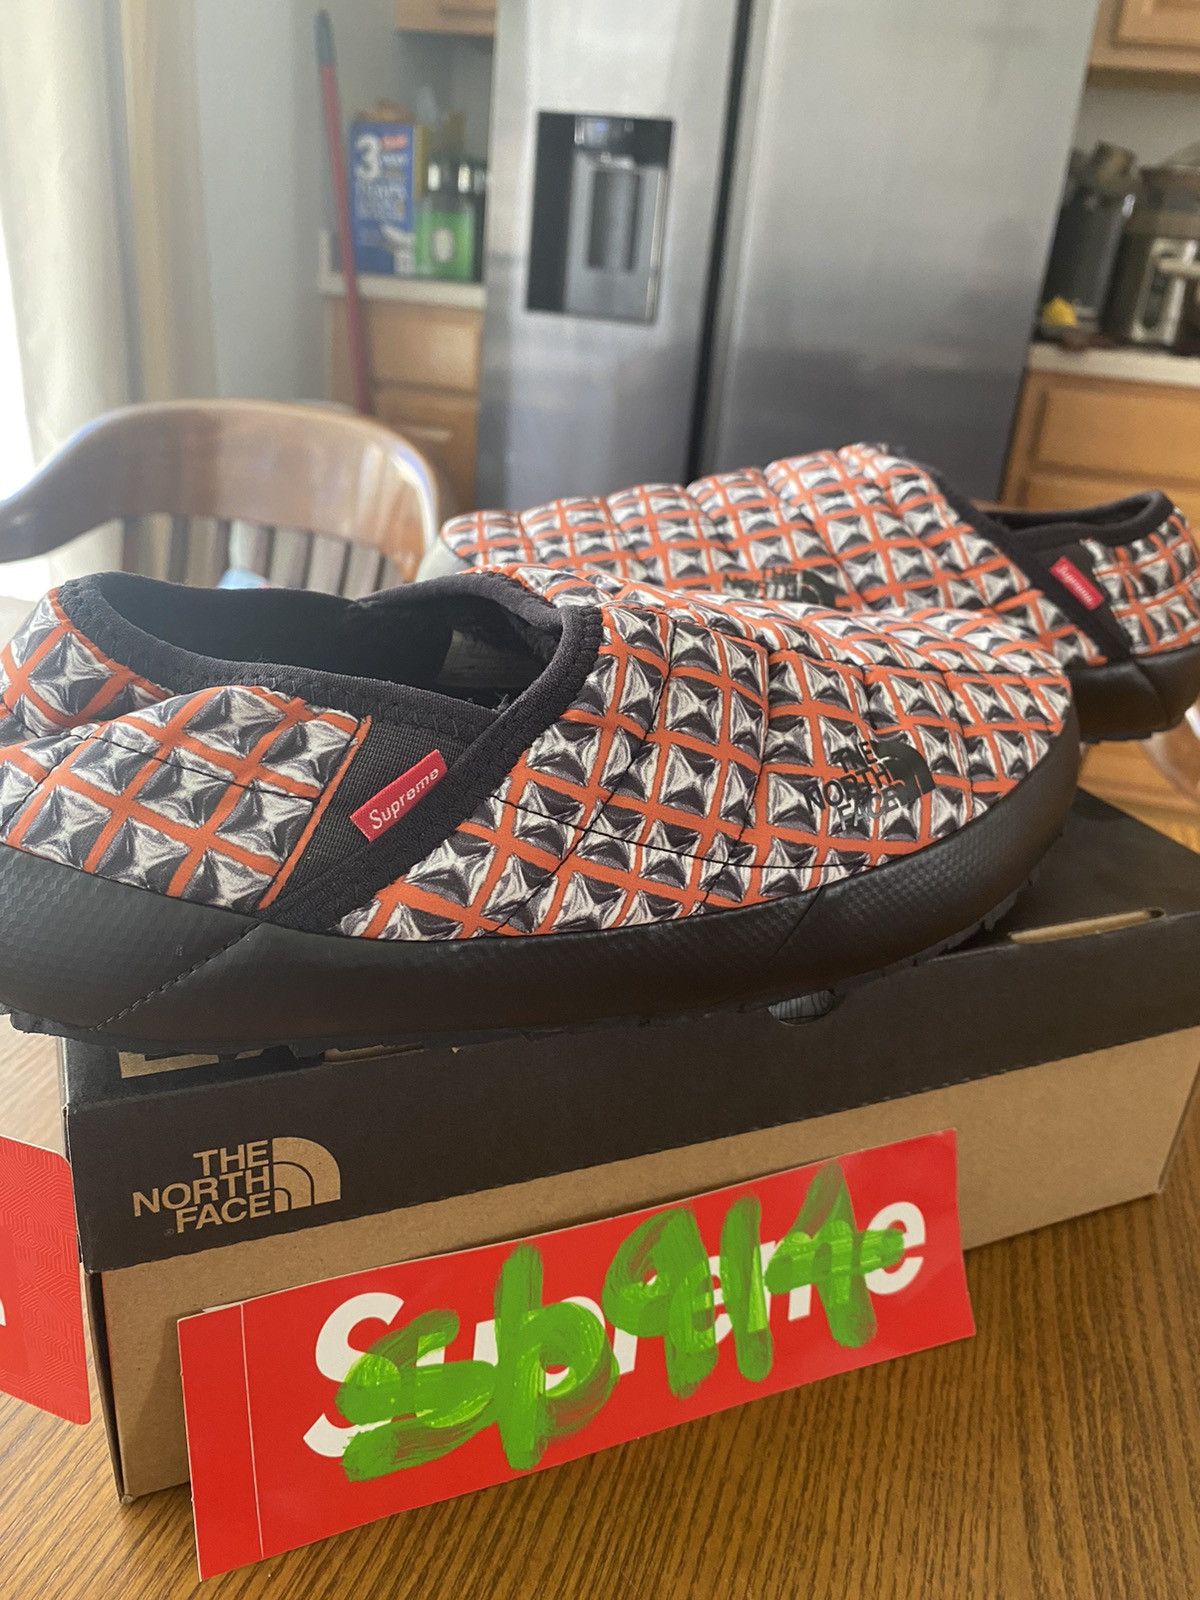 Supreme The North Face Thermoball Traction Mule   Grailed